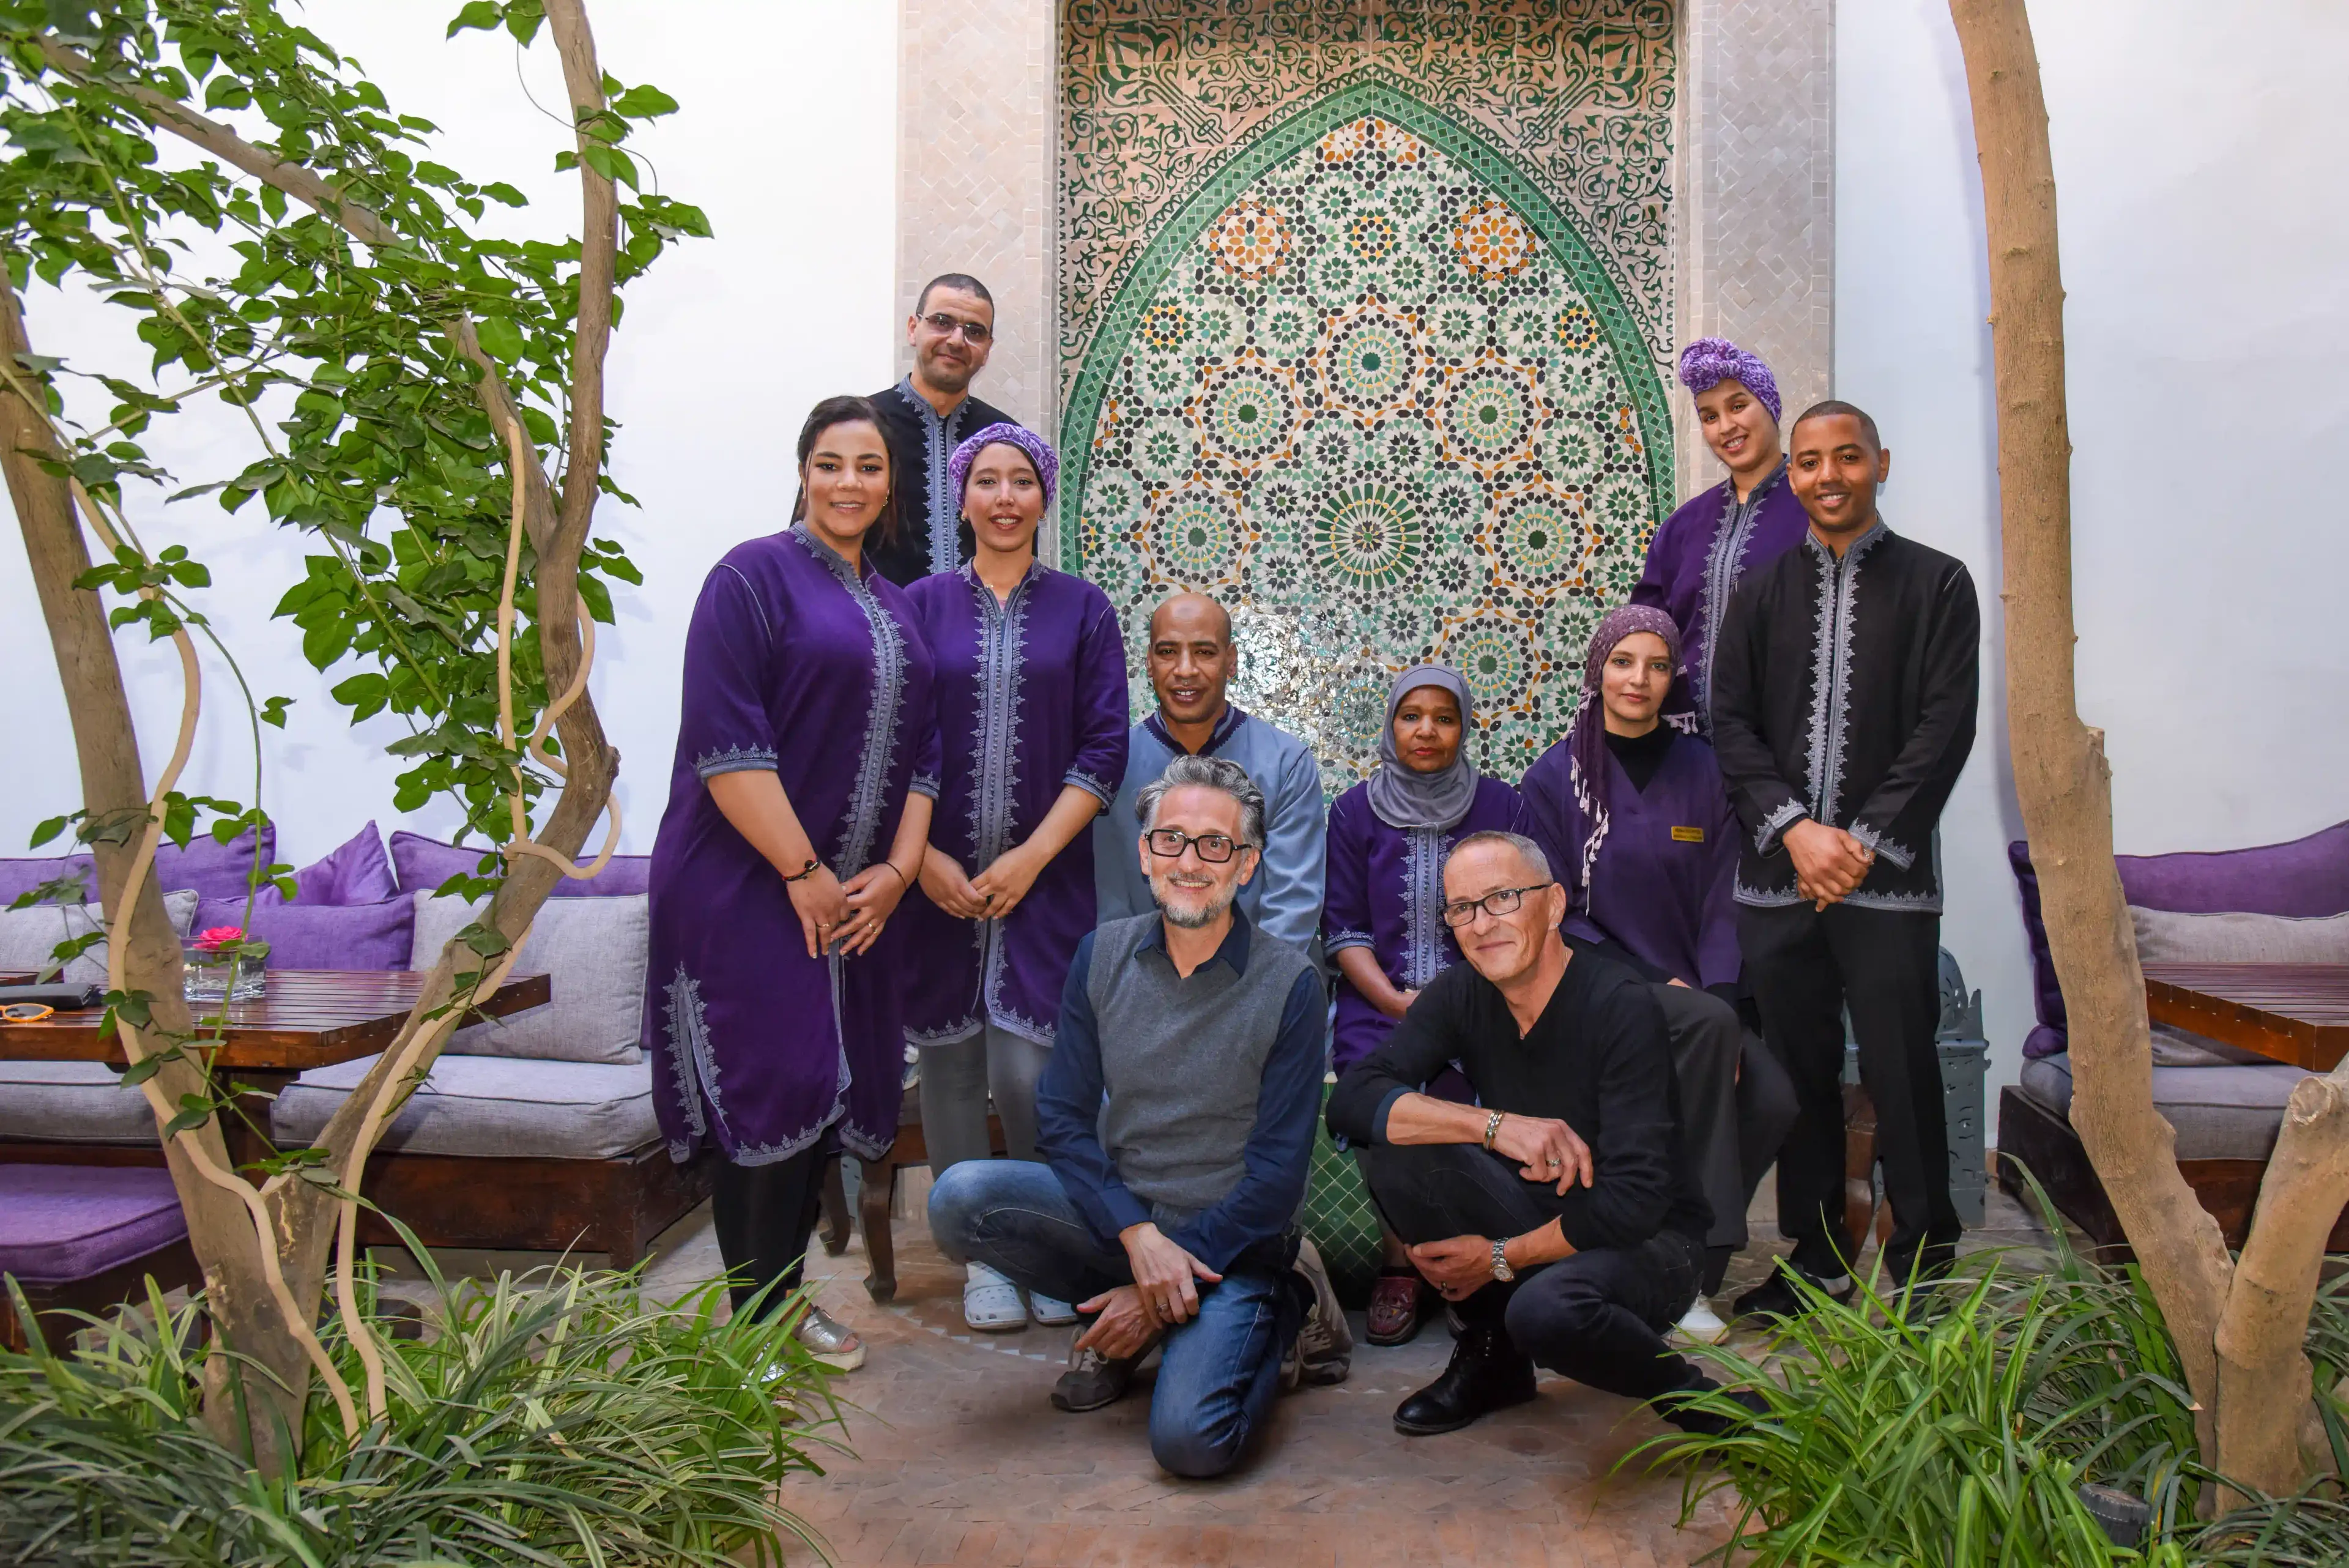 The team of the guesthouse in Marrakech, Riad Houdou